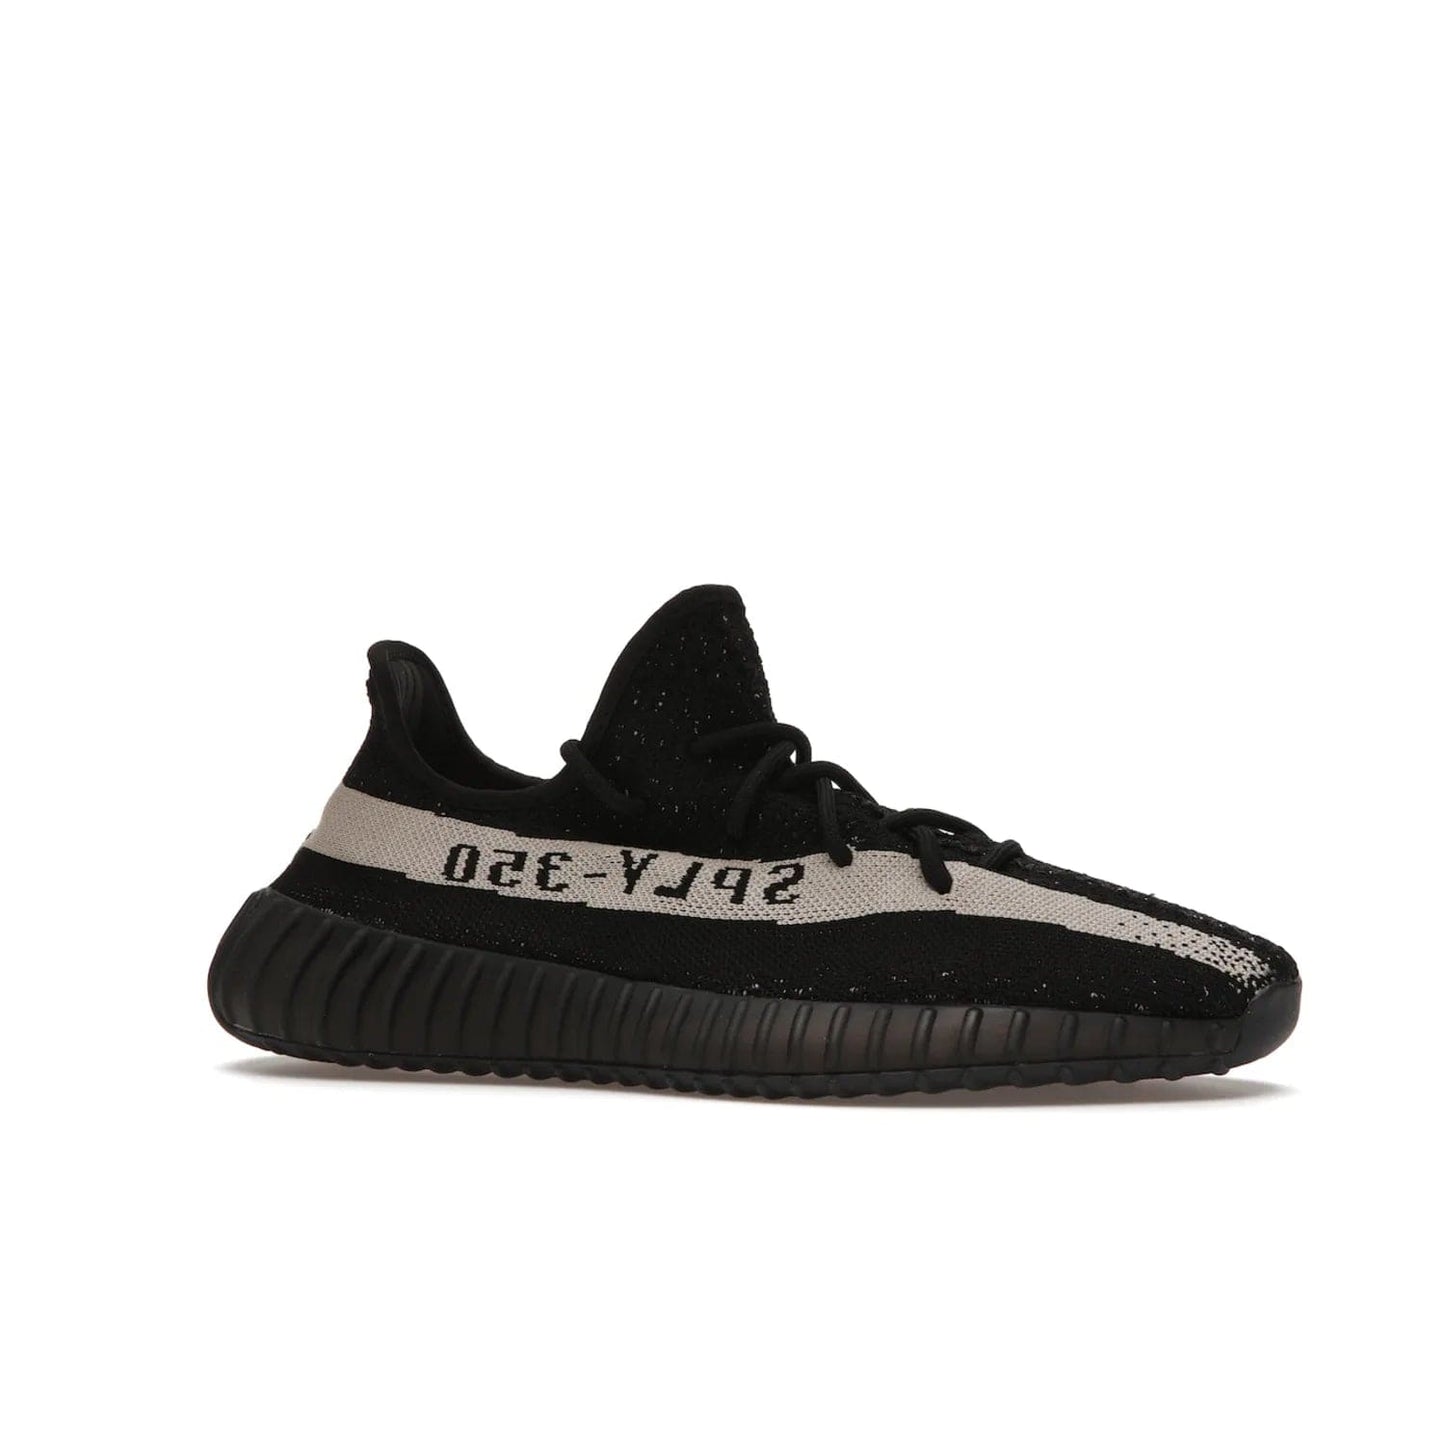 adidas Yeezy Boost 350 V2 Core Black White (2016/2022) - Image 3 - Only at www.BallersClubKickz.com - Stylish adidas Yeezy Boost 350 V2 in classic black with white "SPLY-350" stitched to the side stripe. Features Primeknit upper & Boost sole for comfort. Restock in March 2022.